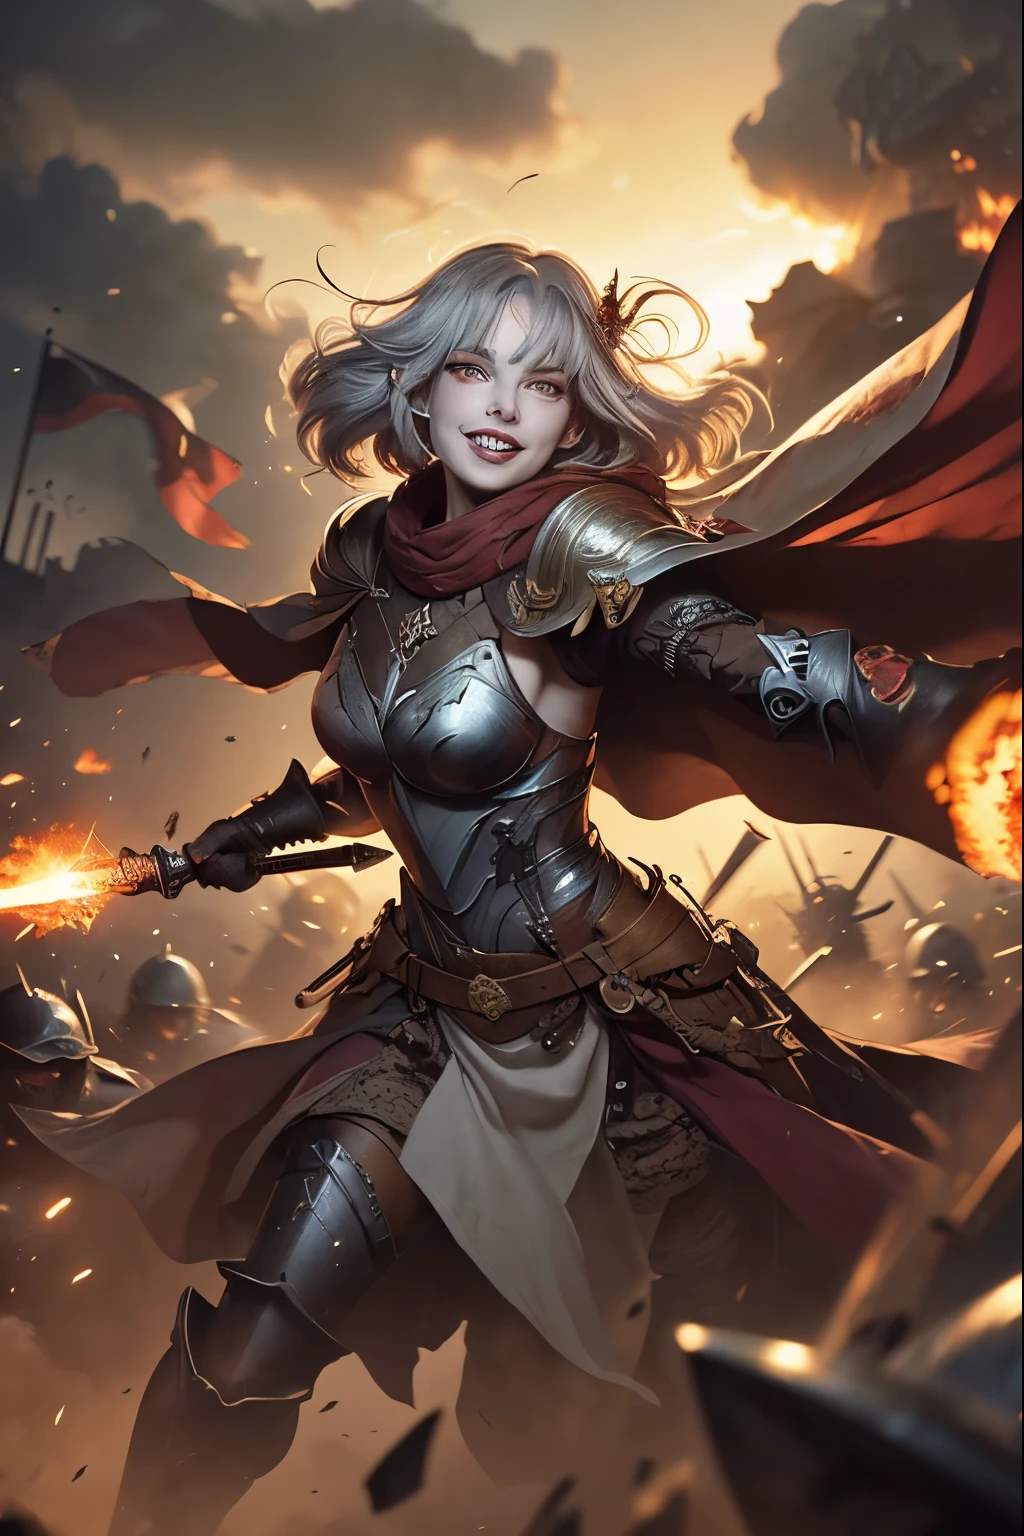 (Ultra-detailed face, Roar, shout:1.3), (Fantasy Illustration with Gothic & Ukiyo-e & Comic Art), (Full Body, A middle-aged dark elf woman with gray hair, blunt bangs, Very long disheveled hair, and dark purple skin, lavender eyes), (The Queen of War is dressed in crimson armor and a crimson velour cloak, adorned with jewels and precious metals), (The Queen of War smiles savagely, leaps up with a shout, strikes a daring pose, and thrusts both great swords forward. Flames explode from the Queen's sword's edge), BREAK (In the background, the tent of the barracks and military flags are flown, and heavily armored allied soldiers rush forward with battle cries. Smoke and dust are flying)